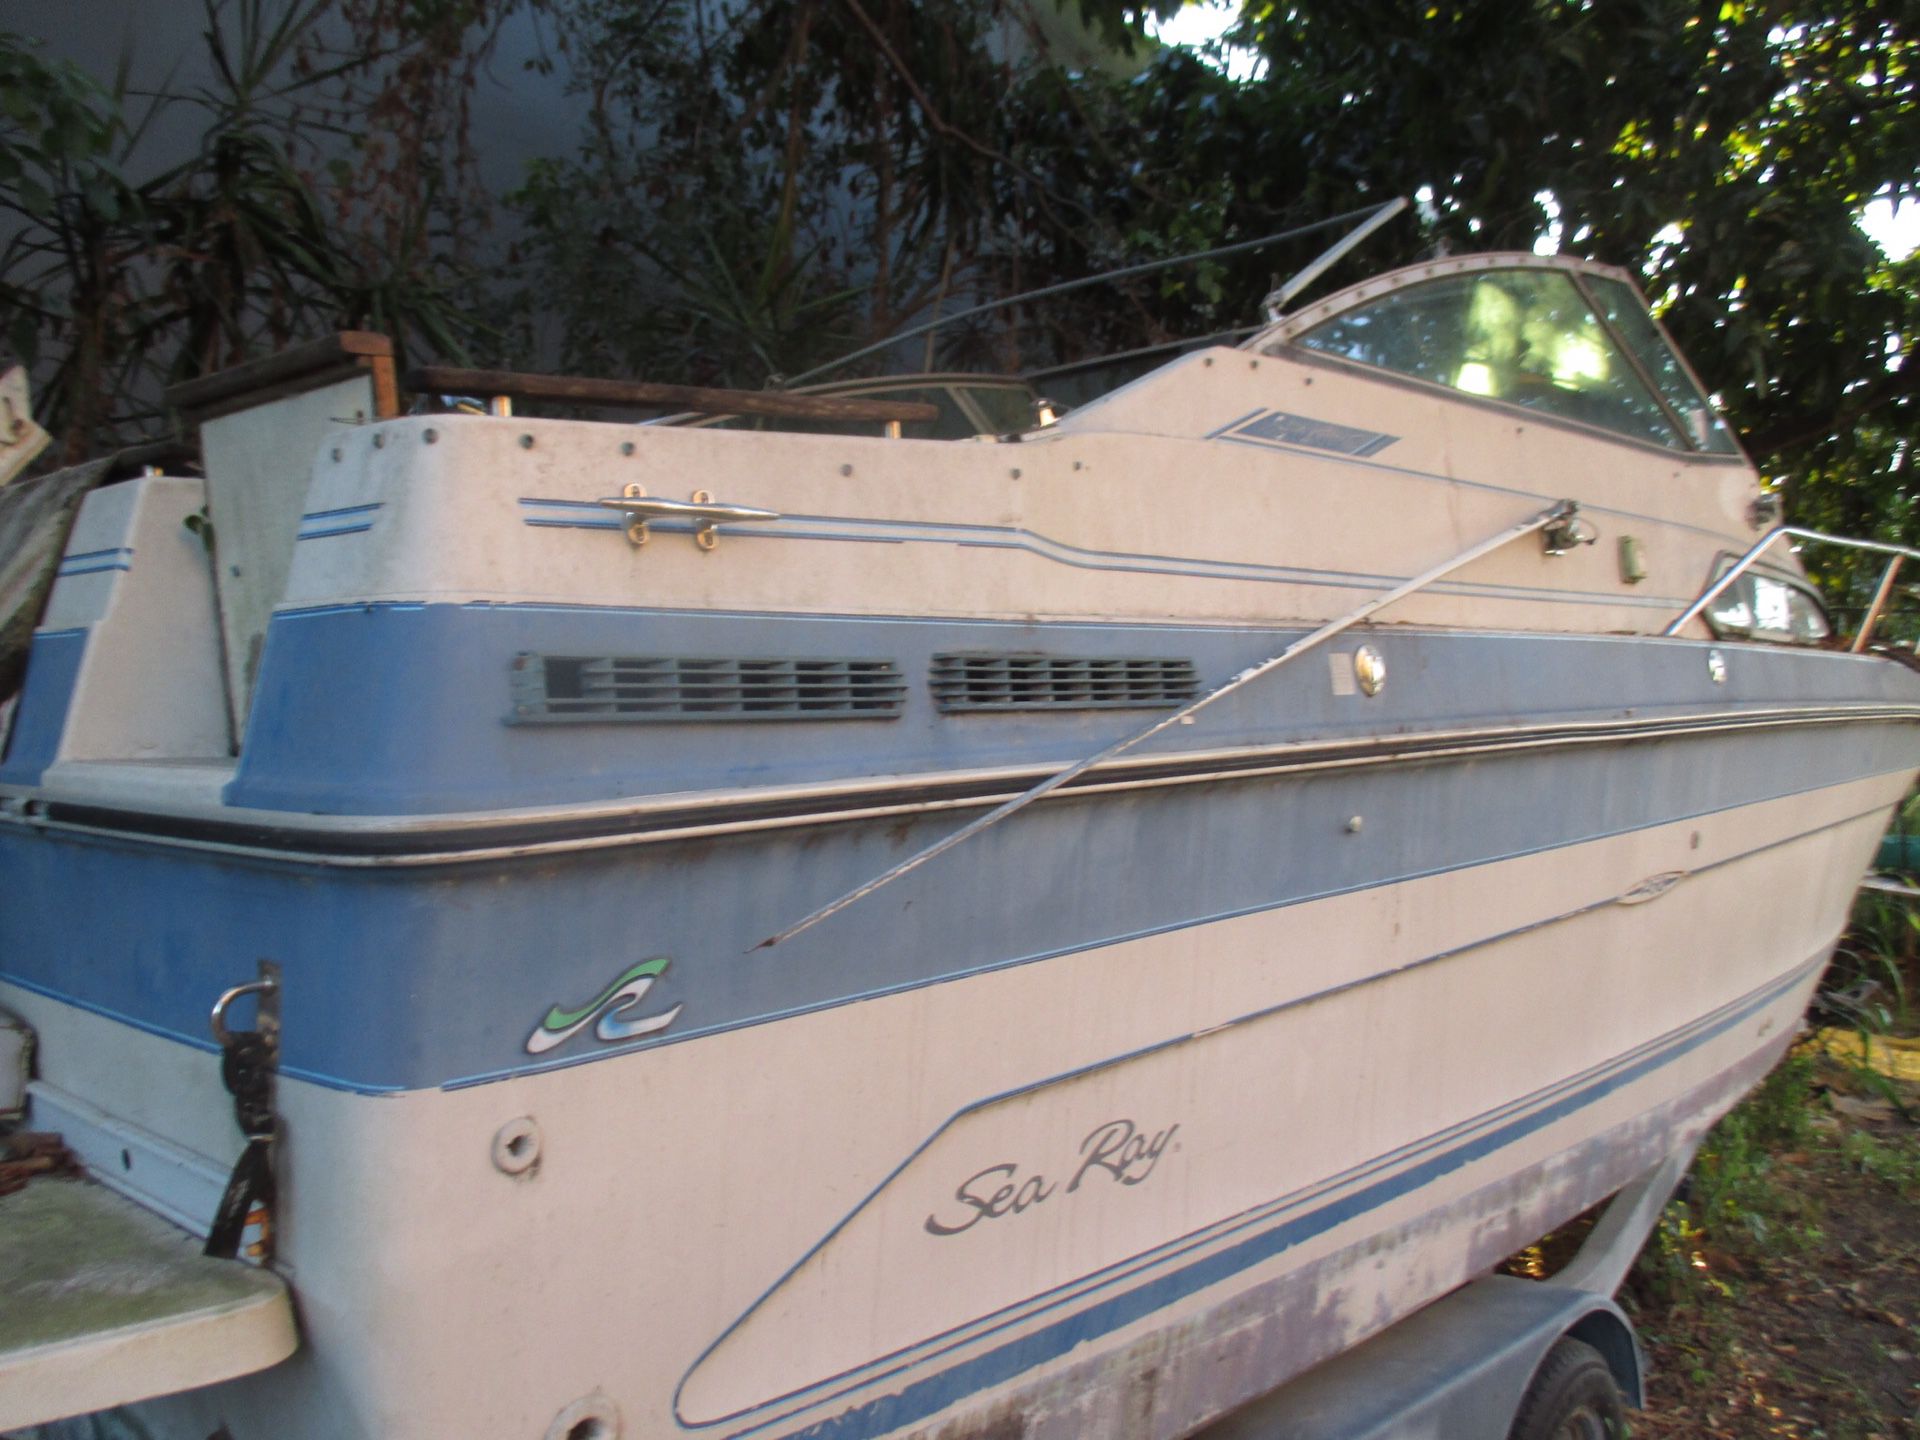 Sea Ray boat...24’. West Kendall.